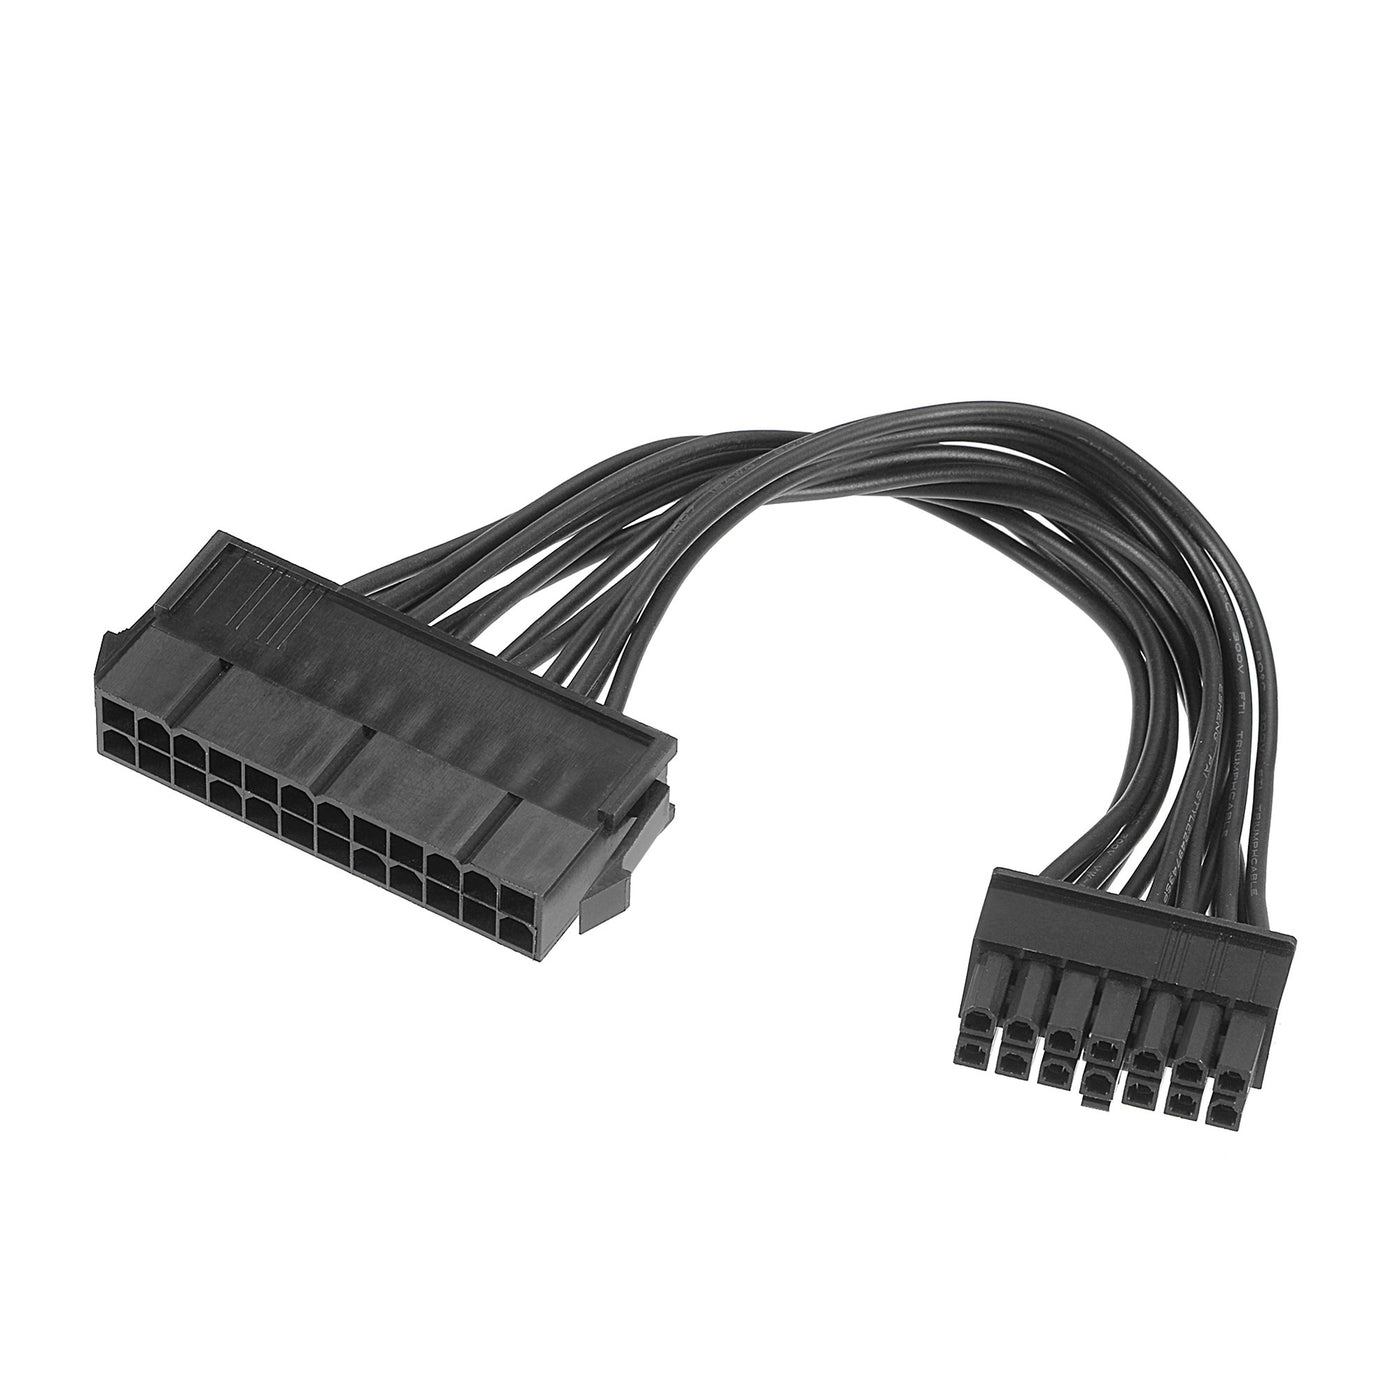 uxcell Uxcell 24 to 14 Pin Mainboard Power Cable for Modular Board 18 AWG 21cm